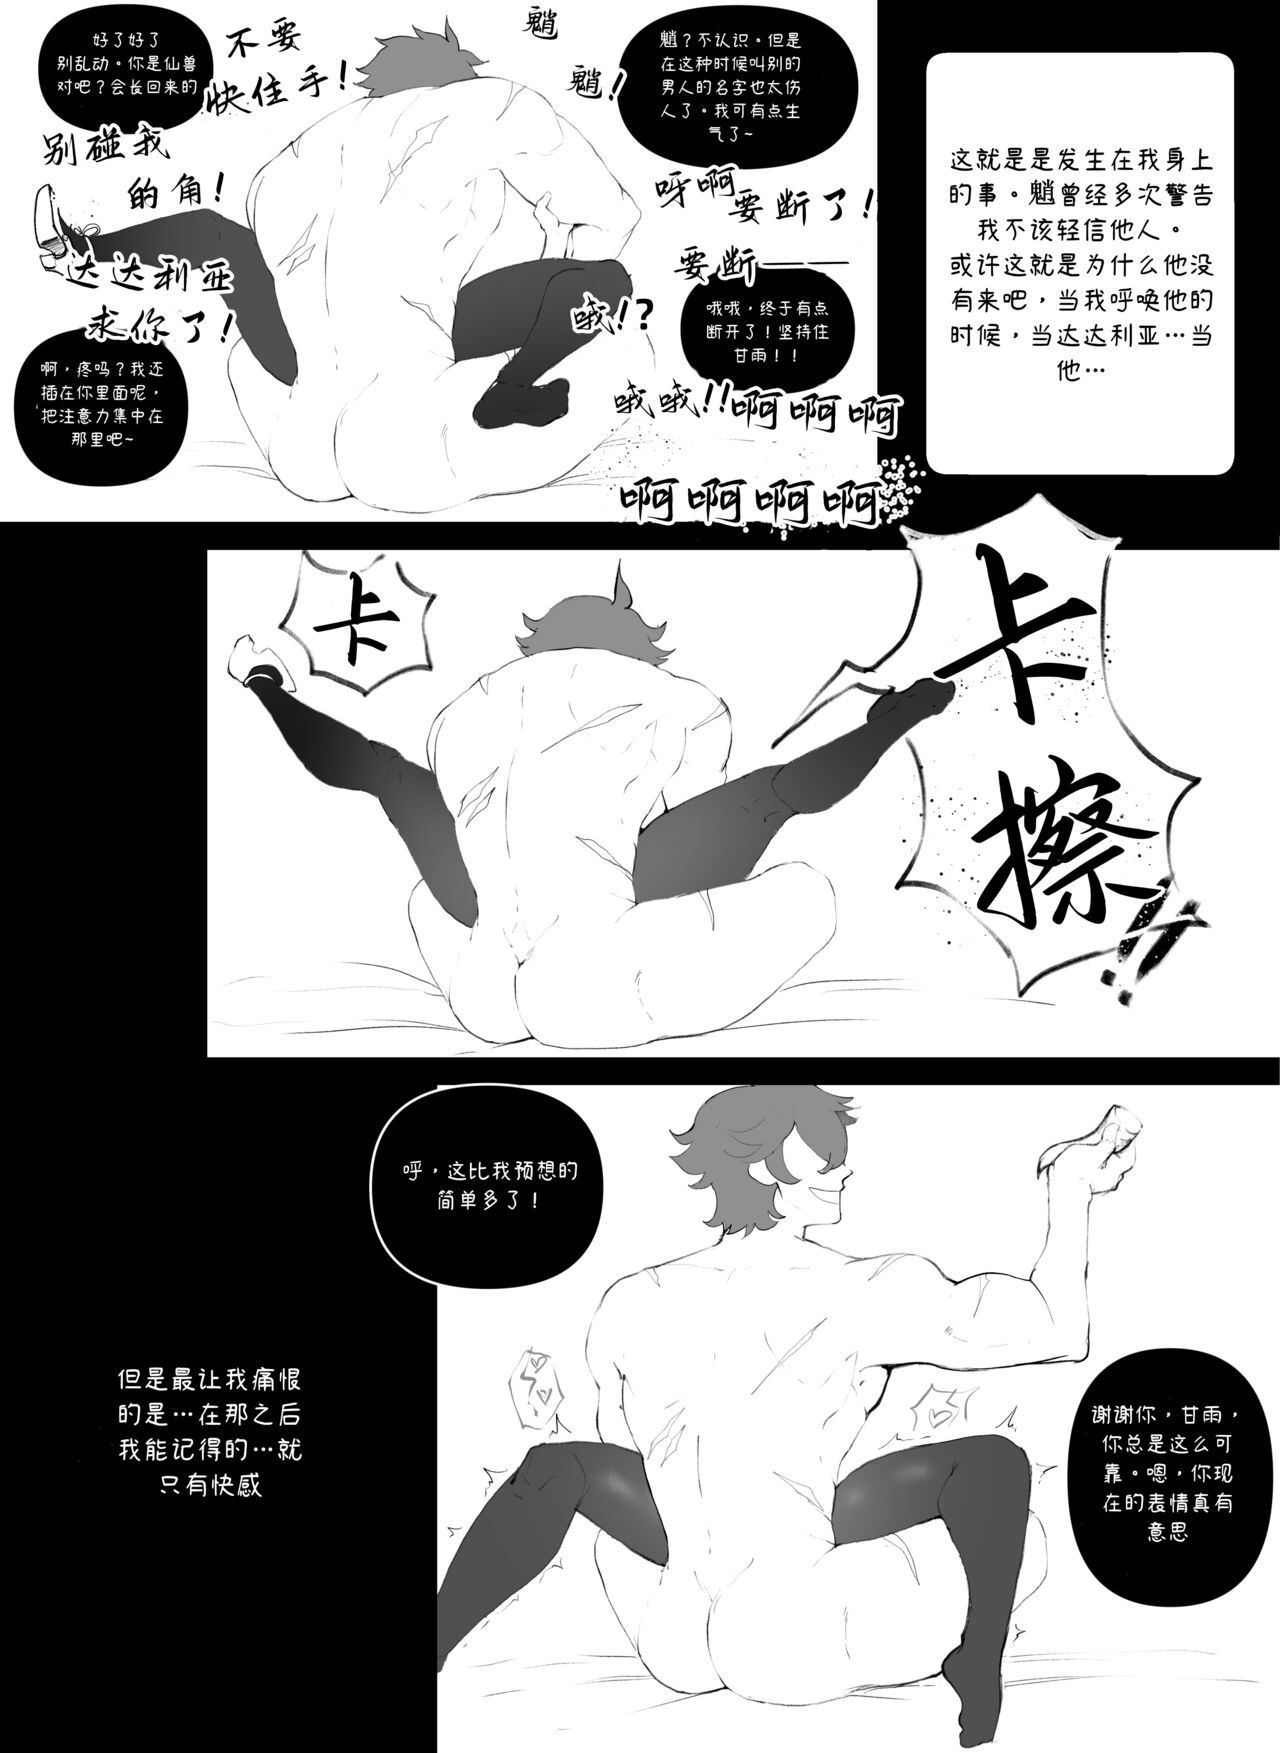 ThiccWithaQ [Chinese] [Ongoing] ThiccWithaQ 【Neko汉化】 75